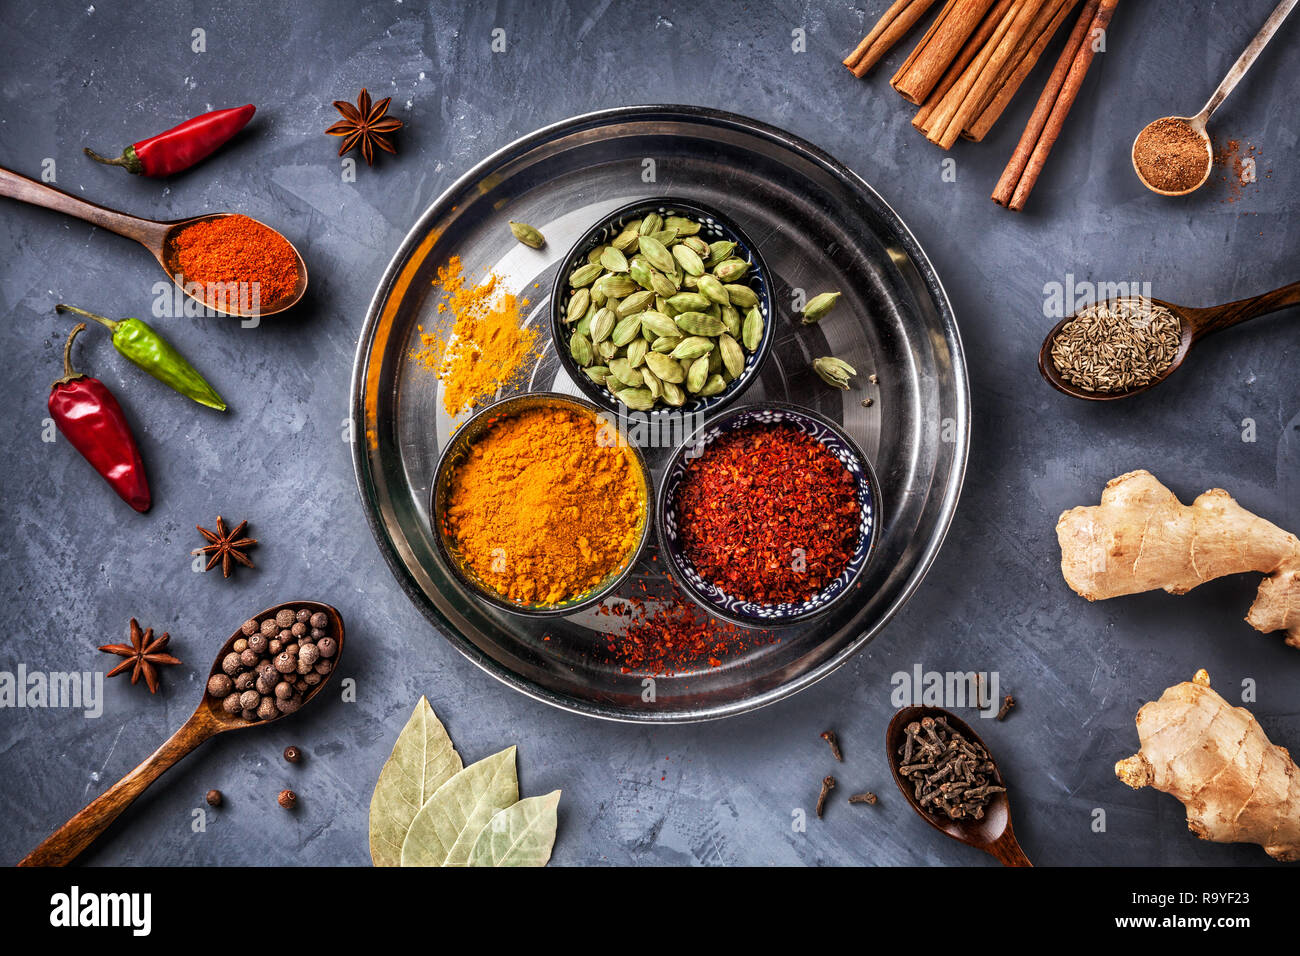 Various Spices like turmeric, cardamom, chili, bayberry, bay leaf, paprika, ginger, cinnamon, cumin, star anise and clove on grunge background Stock Photo